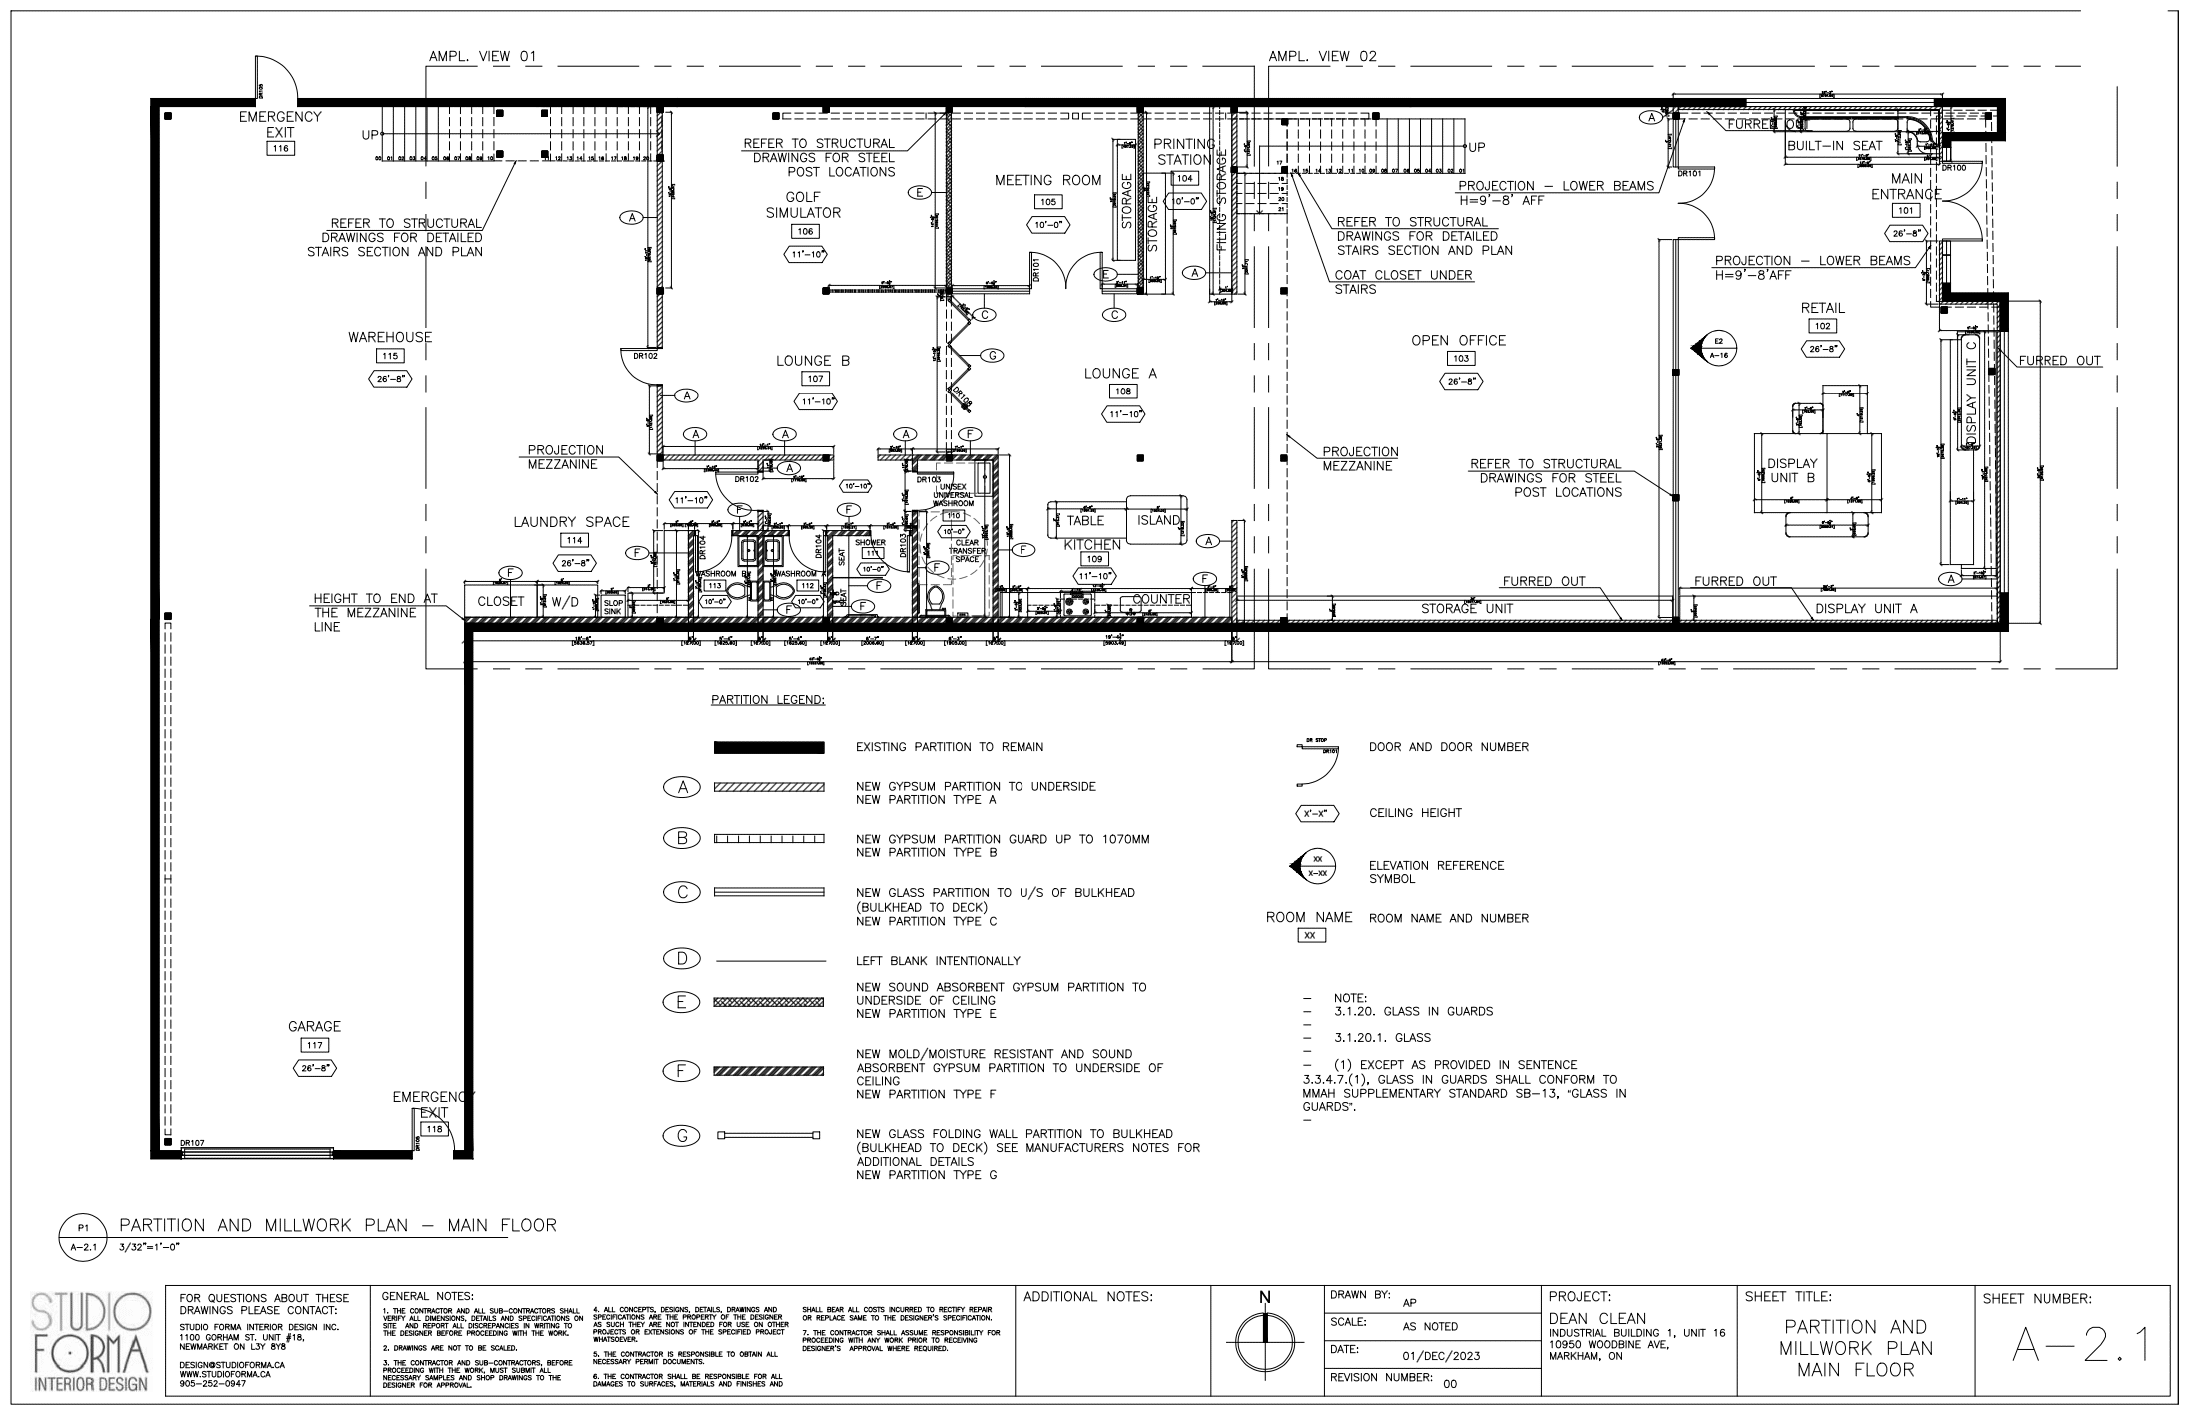 Construction Drawings for an office build-out